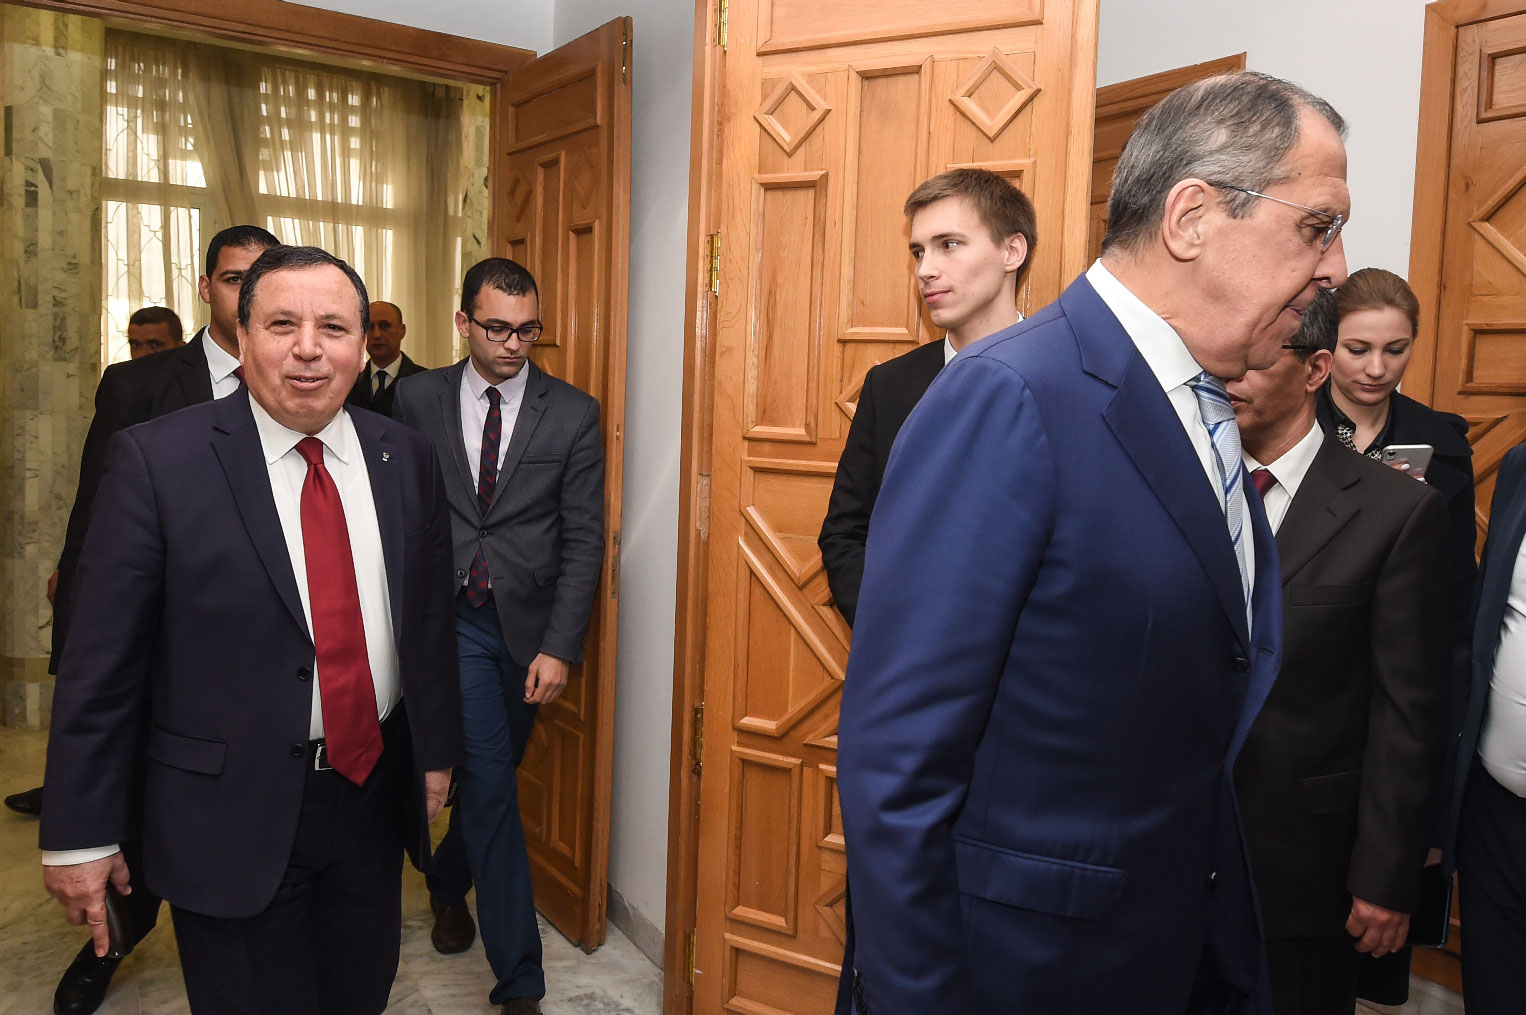 Tunisian Foreign Minister Khemaies Jhinaoui (L) arrives for a meeting with visiting Russian Foreign Minister Sergei Lavrov (R) in the capital Tunis on January 26, 2019.